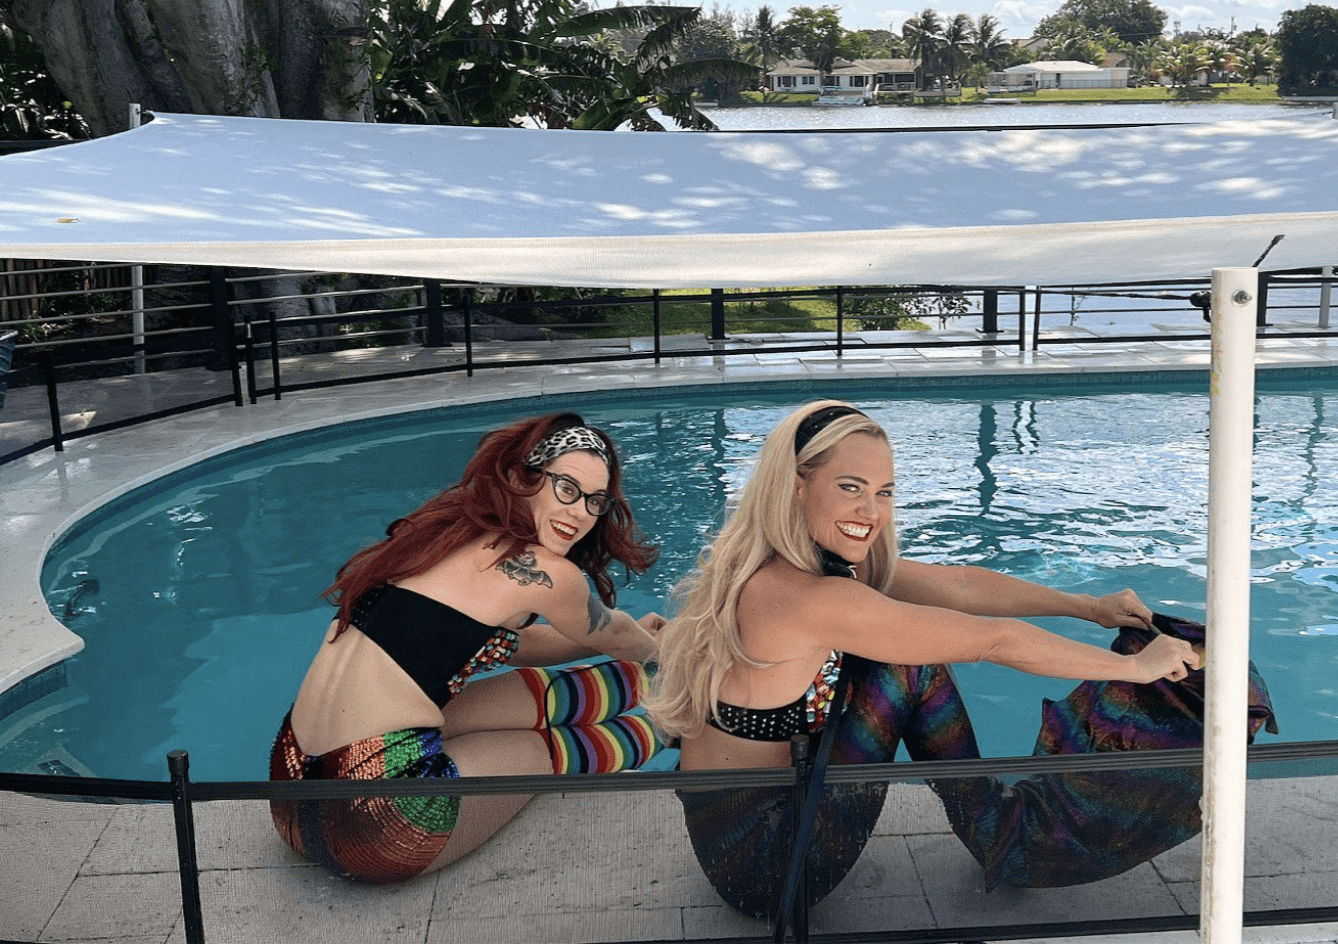 Two female swimmers, one blond, one redhead, in mermaid costumes in front of a pool.